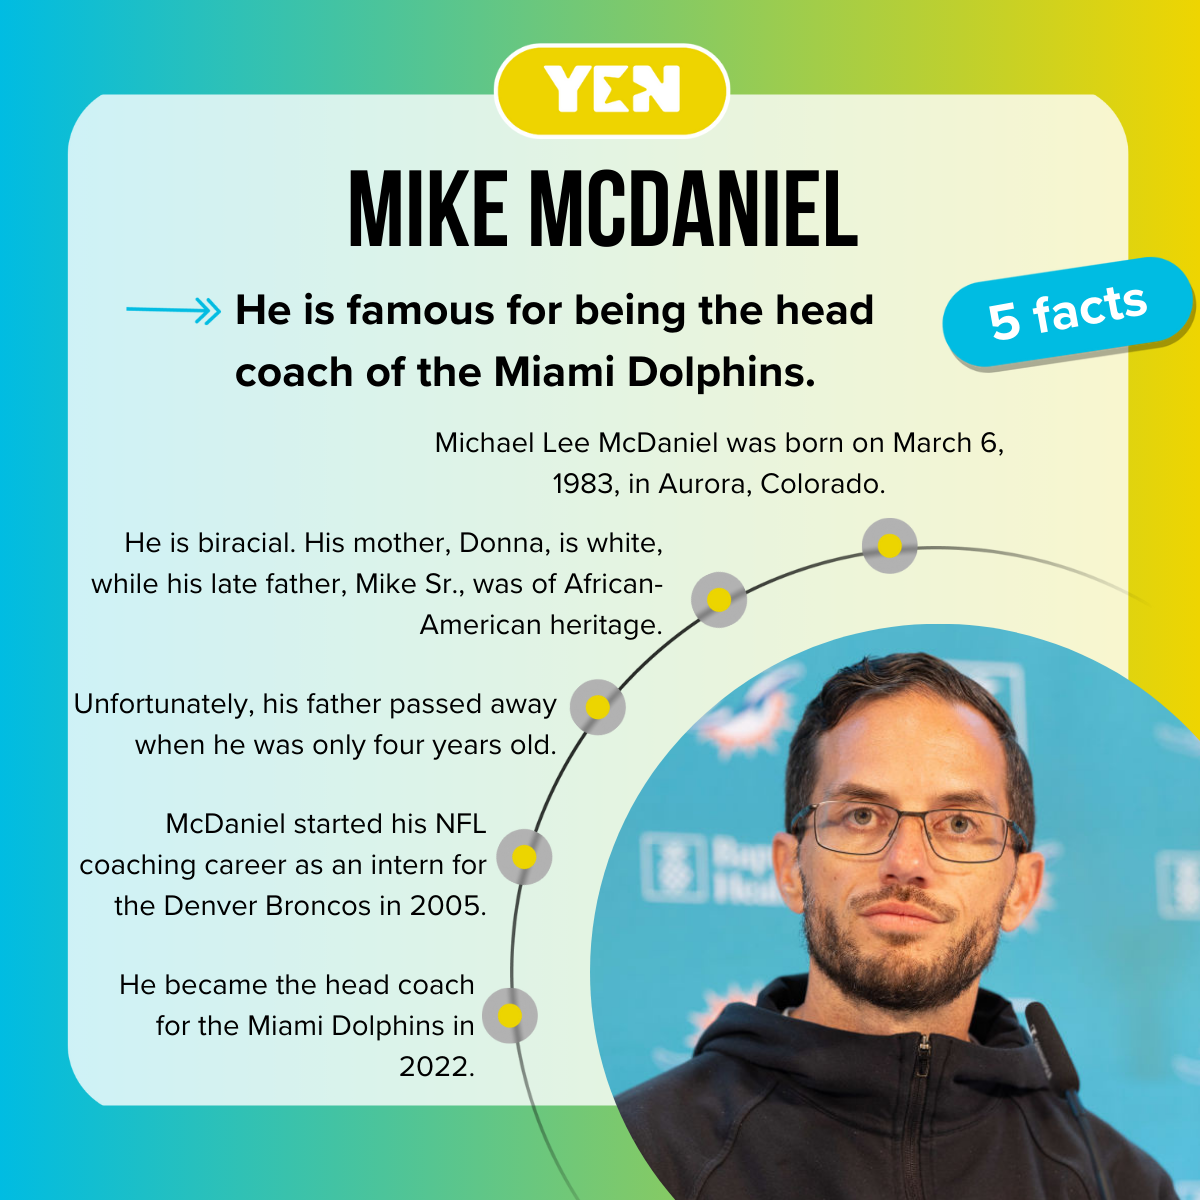 5 facts about Mike McDaniel